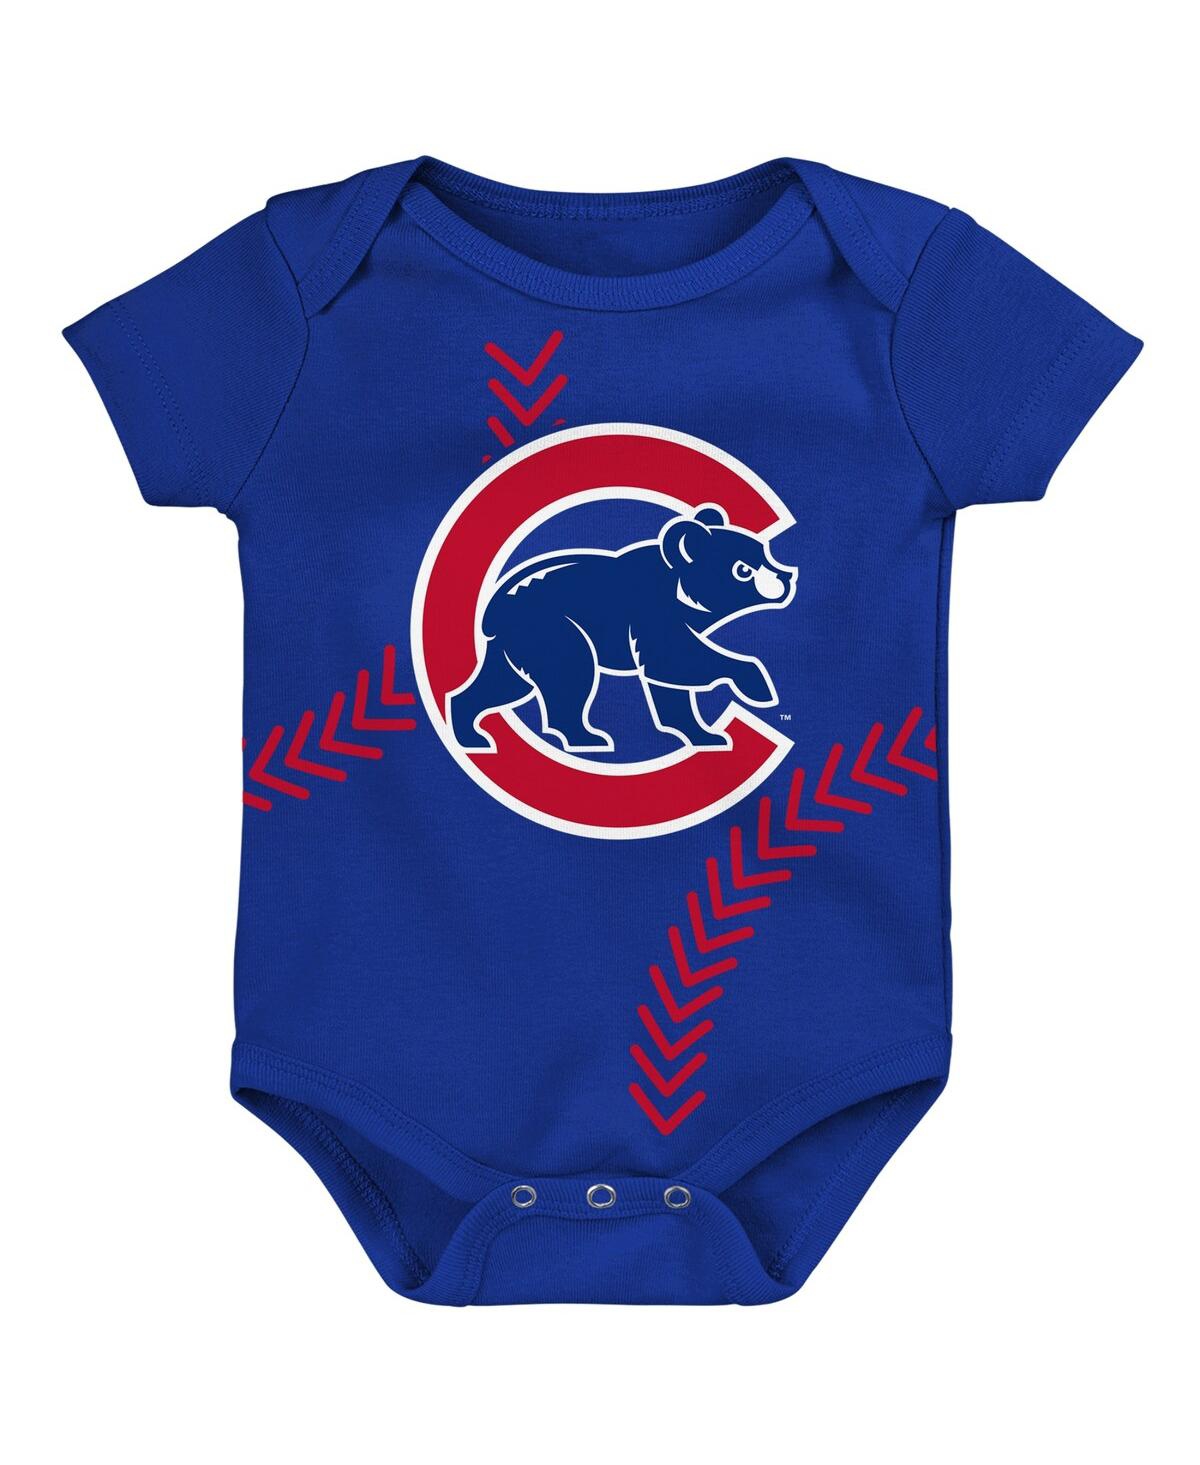 Shop Outerstuff Newborn And Infant Boys And Girls Royal Chicago Cubs Running Home Bodysuit